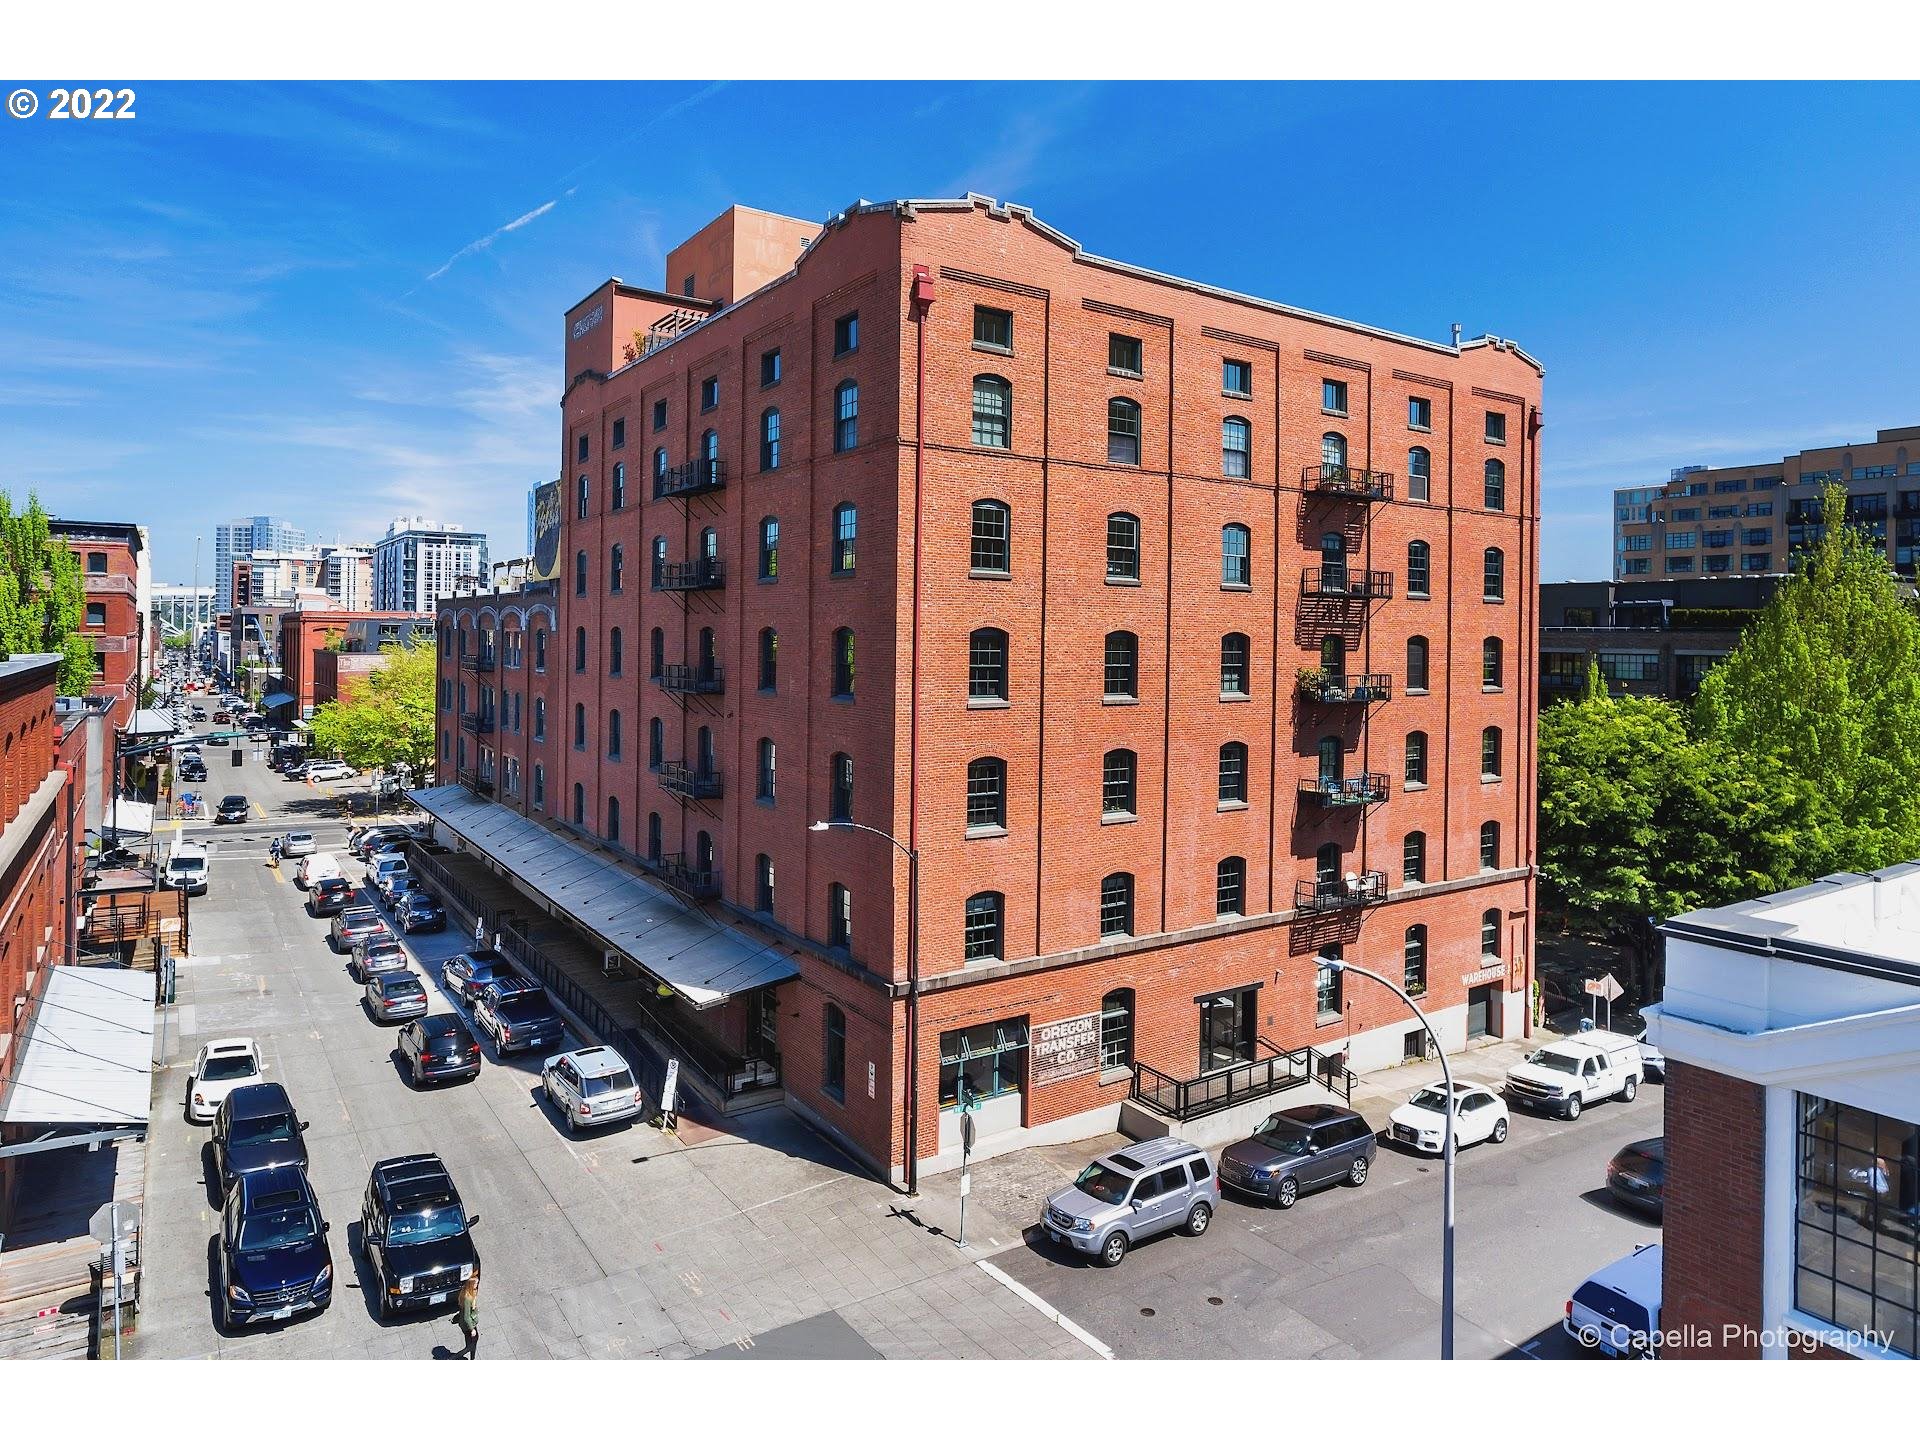 You might also be interested in CHOWN PELLA LOFTS